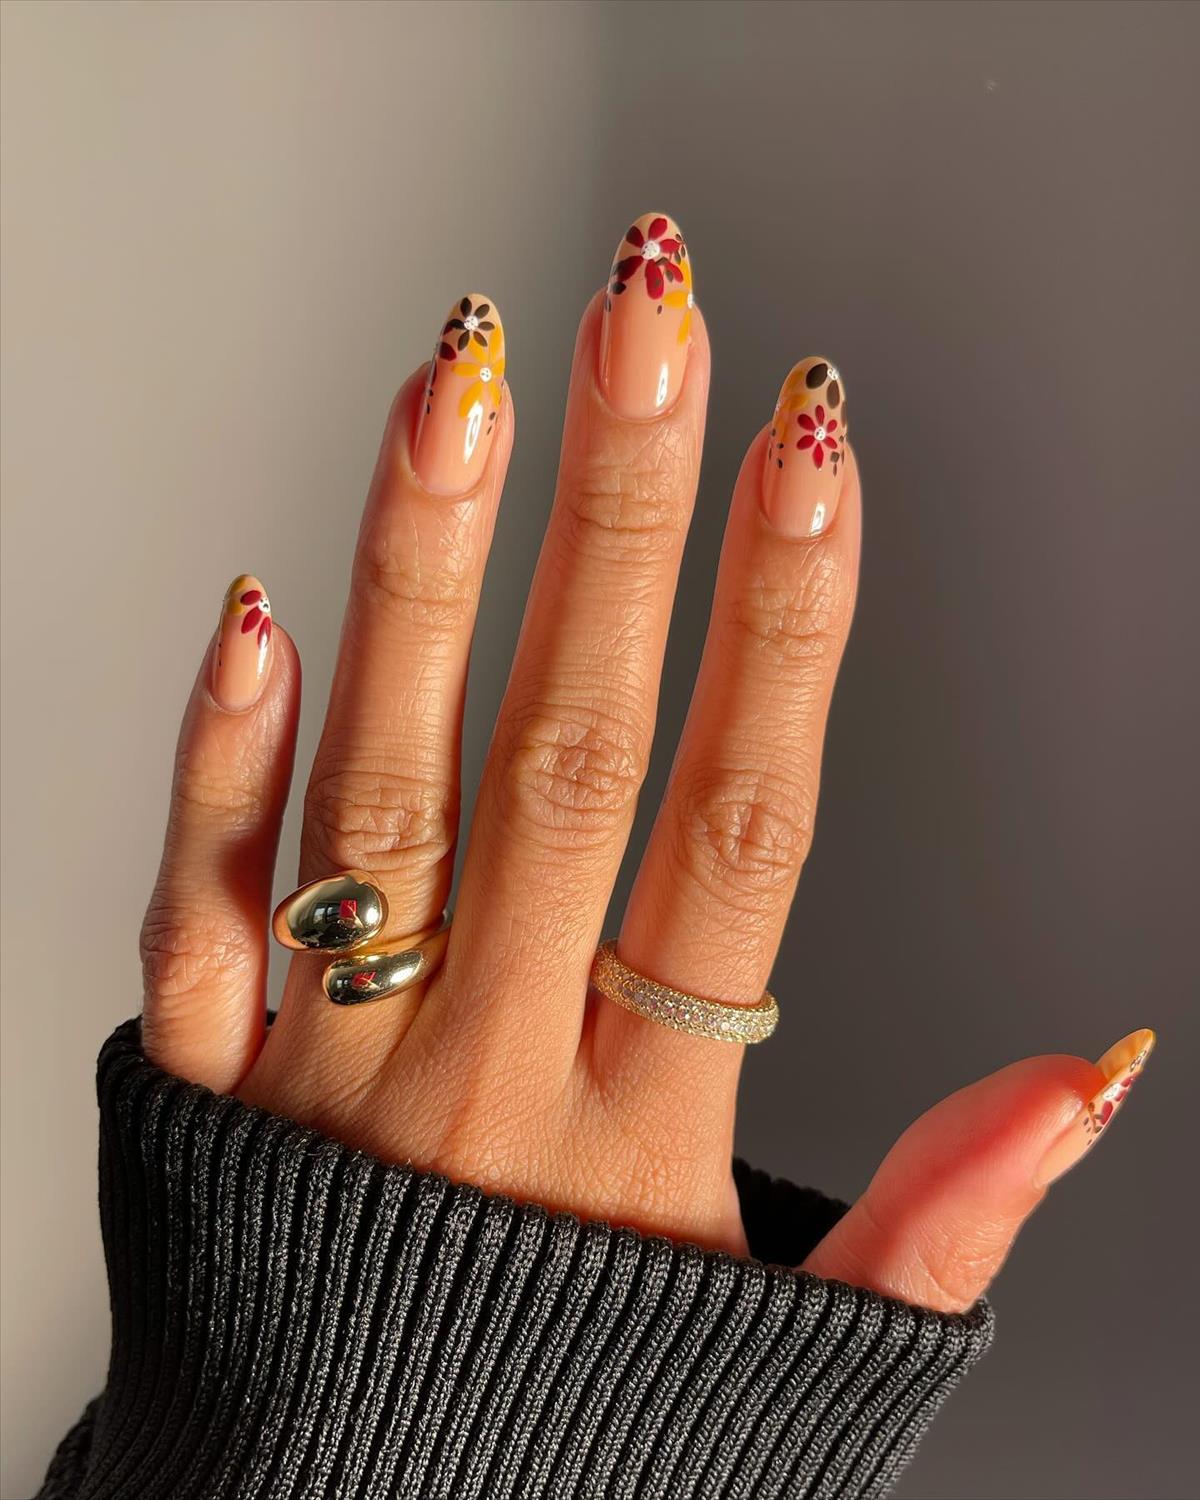 Best October Nails and Fall Nails Inspo to Try Now